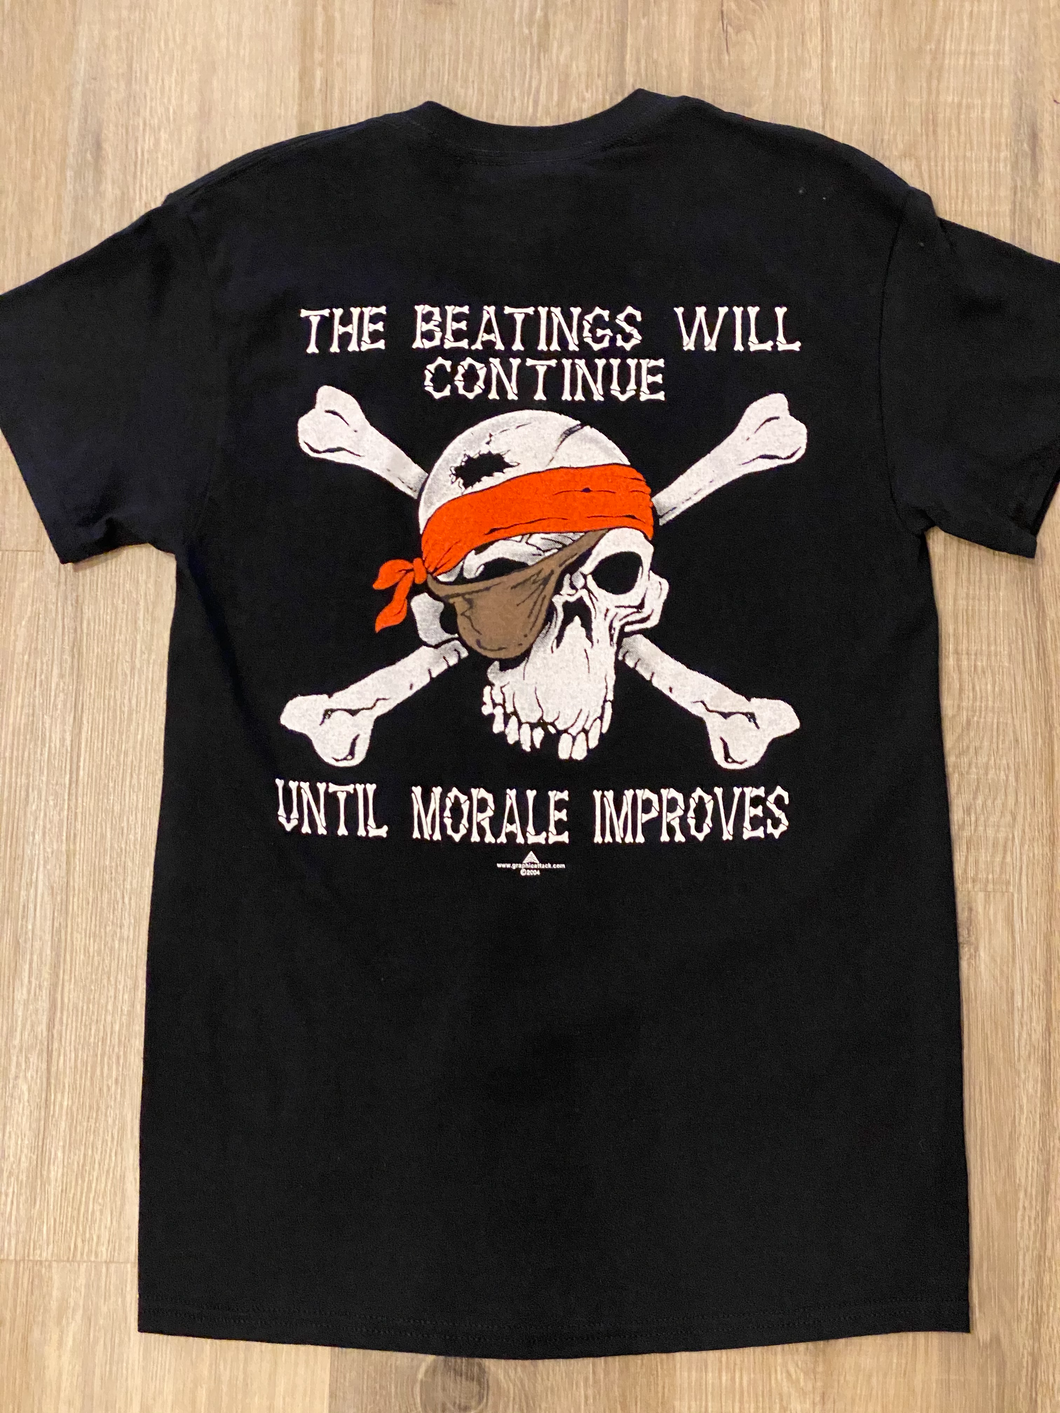 The Beatings Will Continue Tee